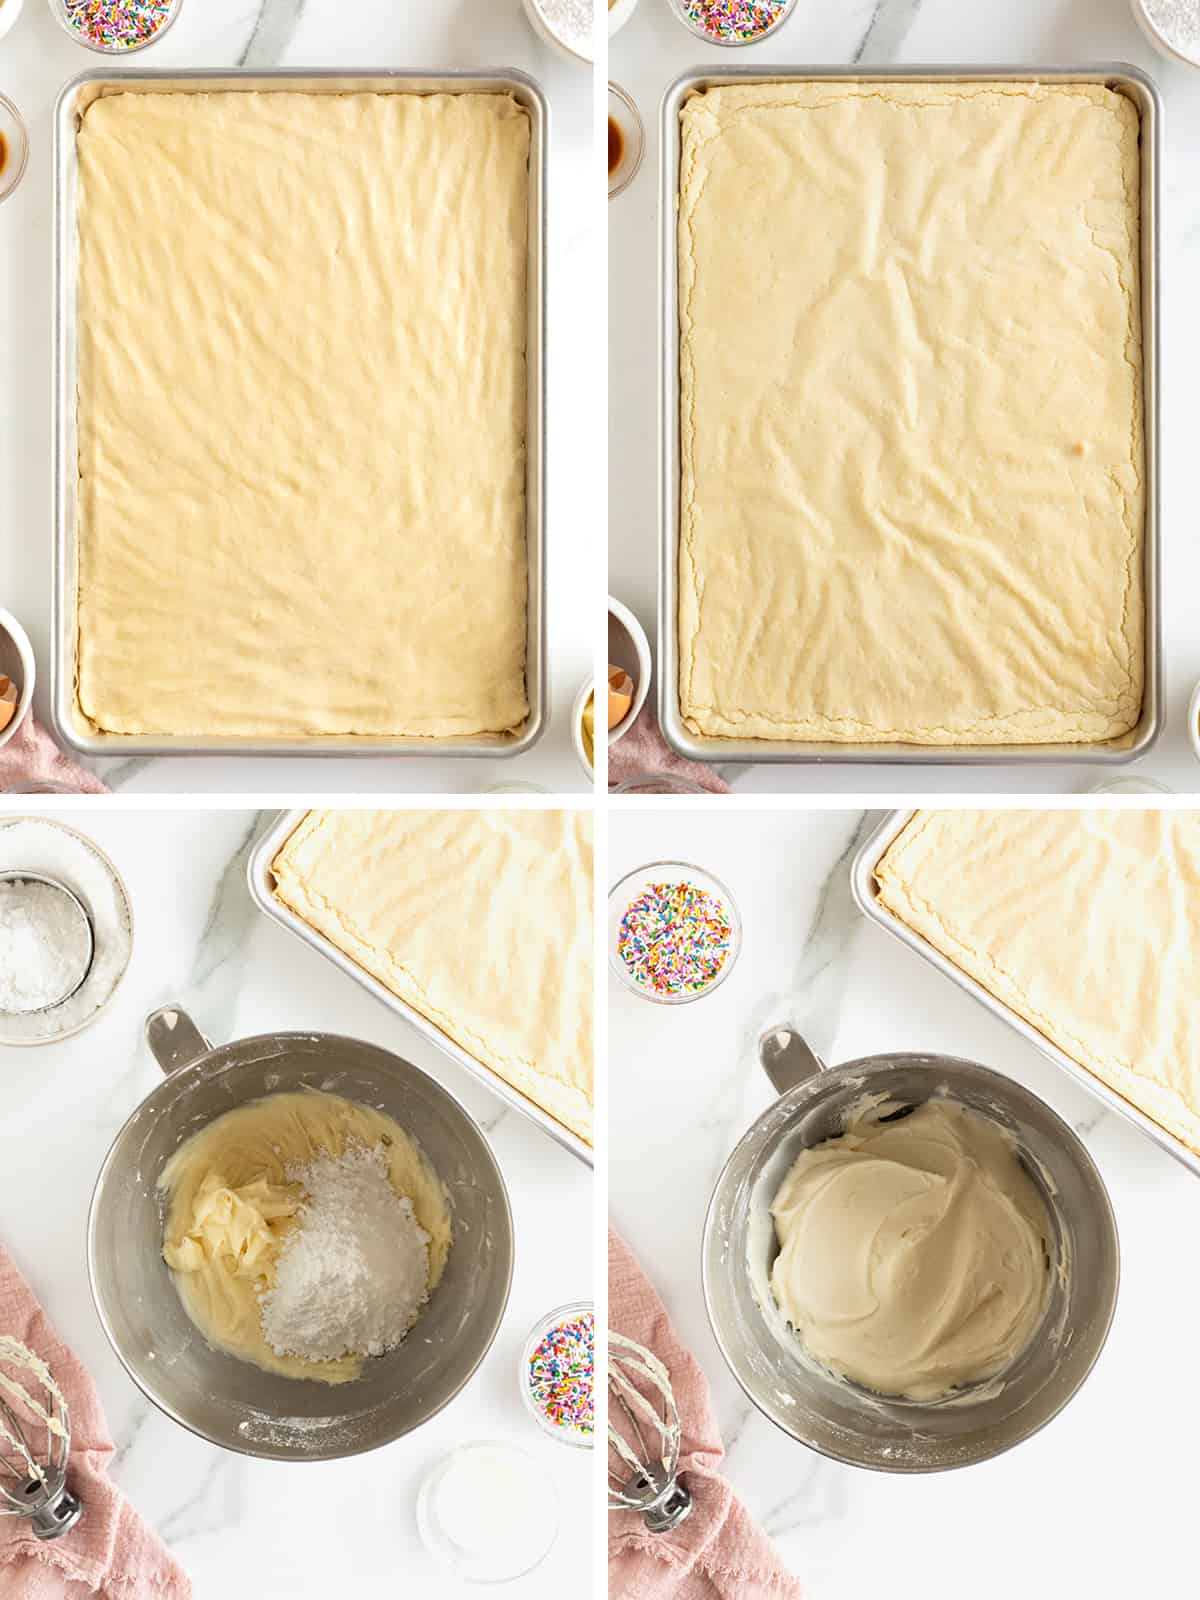 Steps to make sugar cookie bars and cream cheese icing.